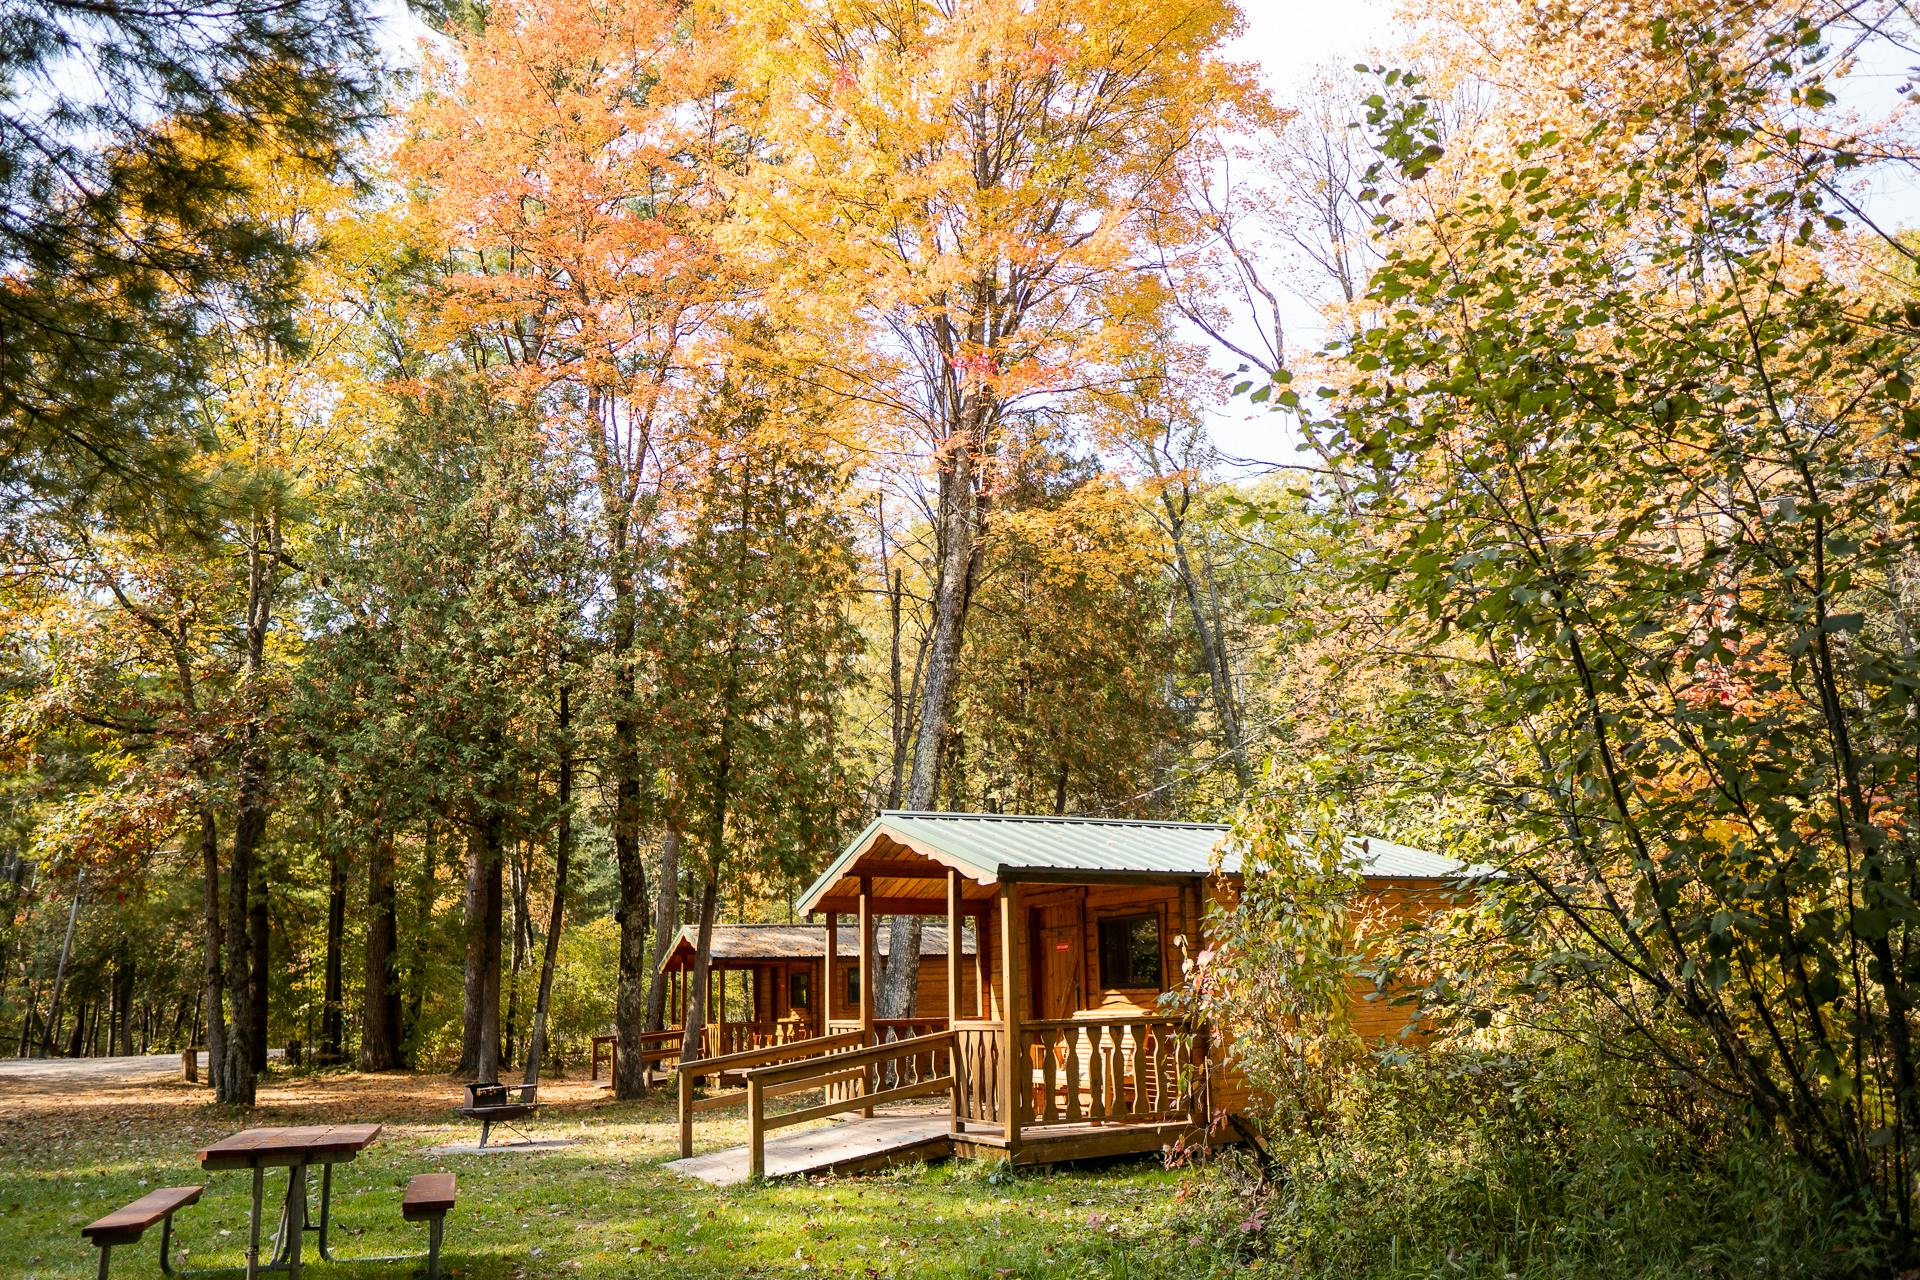 Campgrounds for a Long Weekend Getaway?